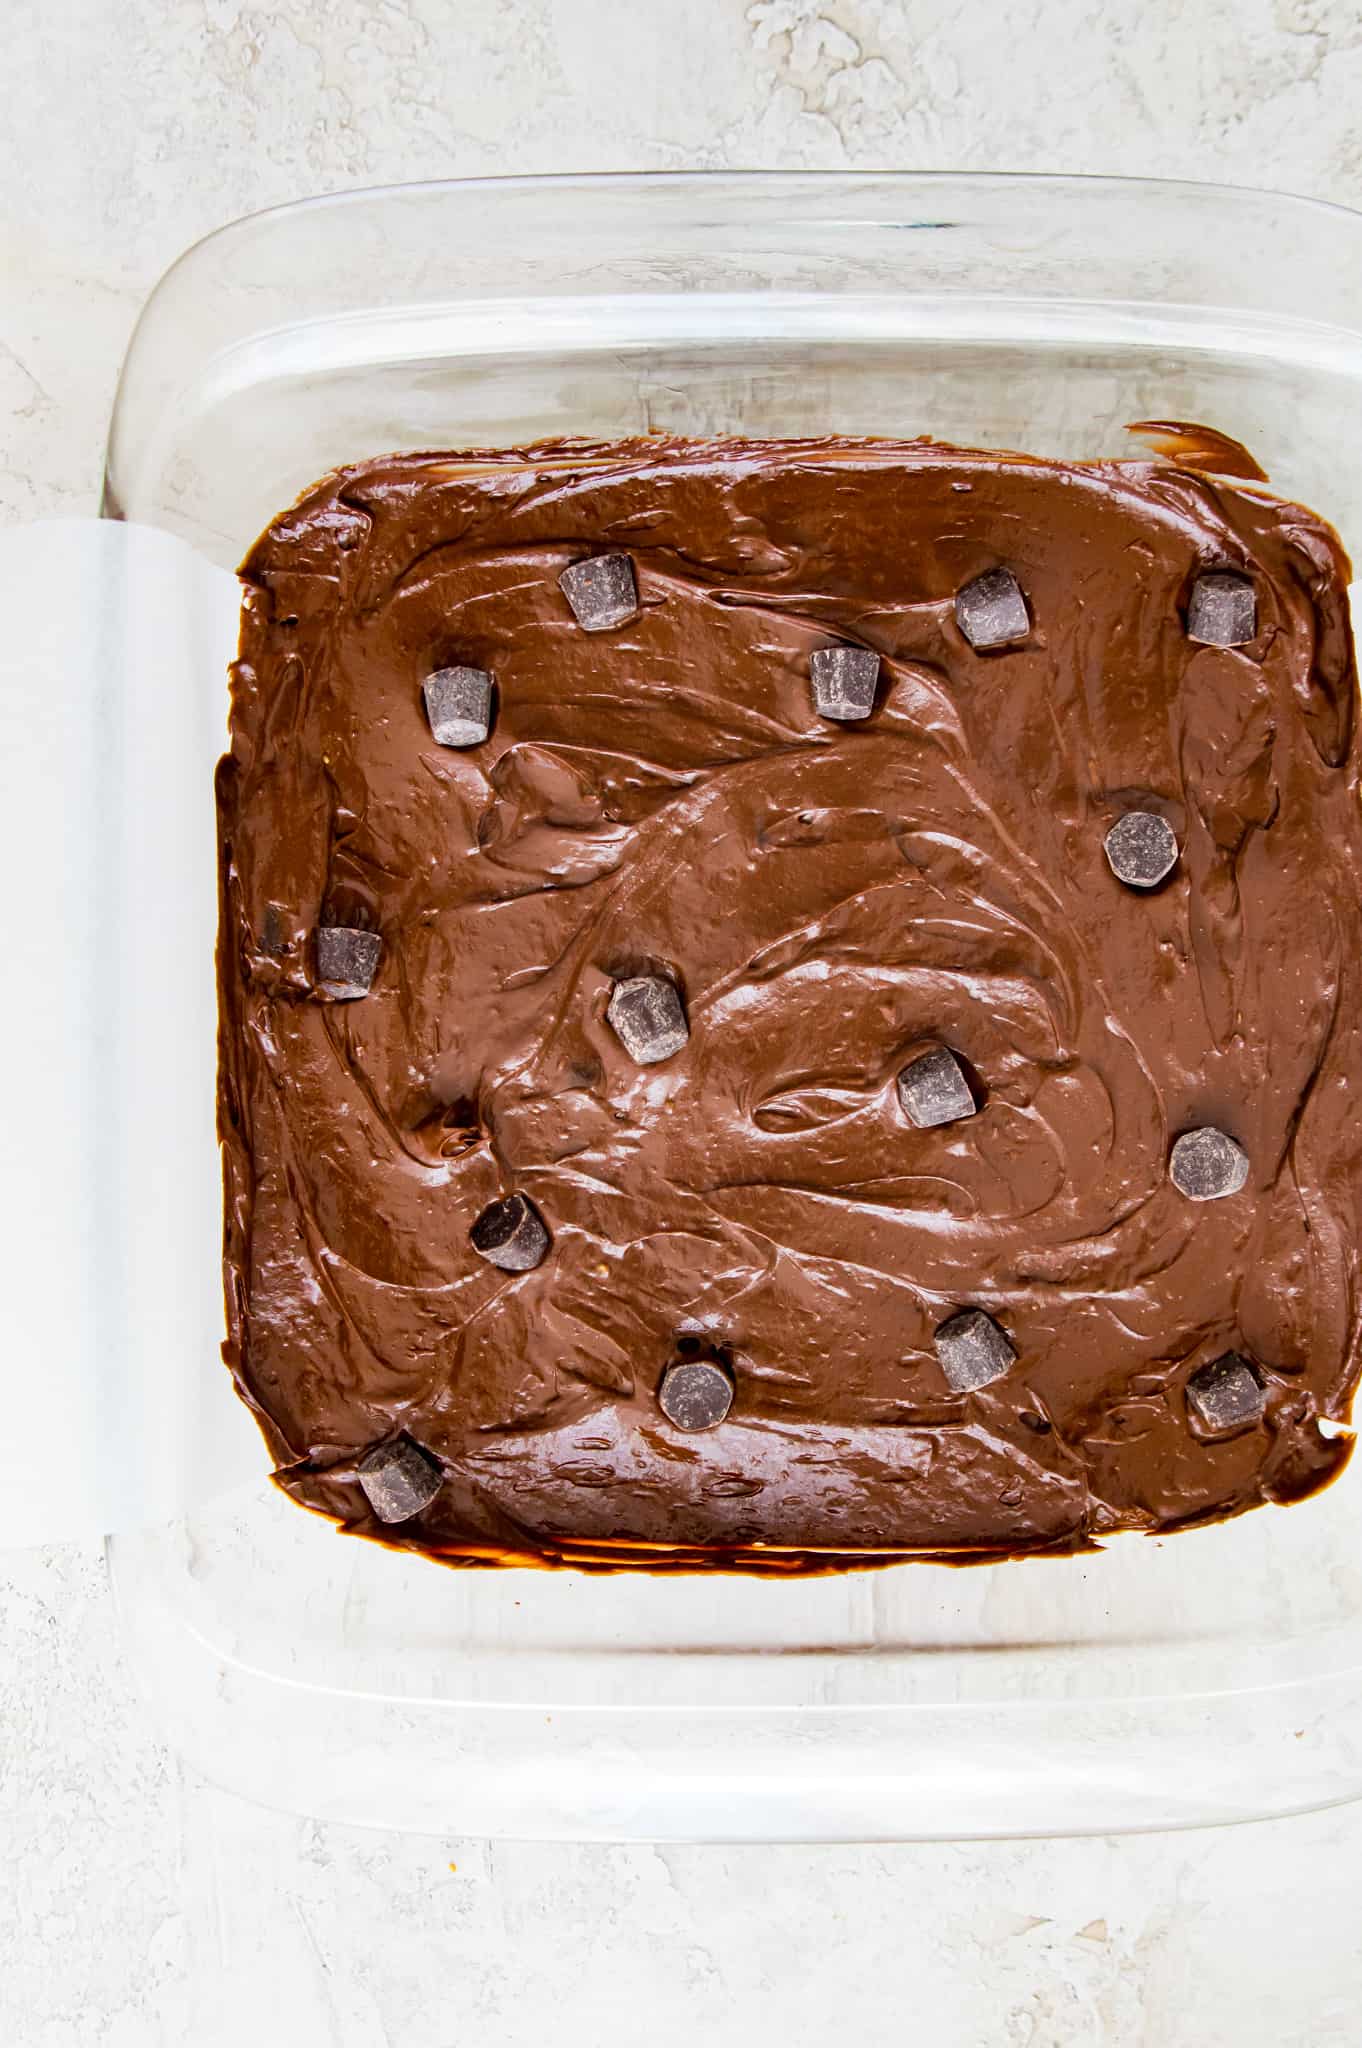 Avocado brownie batter in a pan topped with chocolate chips | Paleo Double Chocolate Avocado Brownies